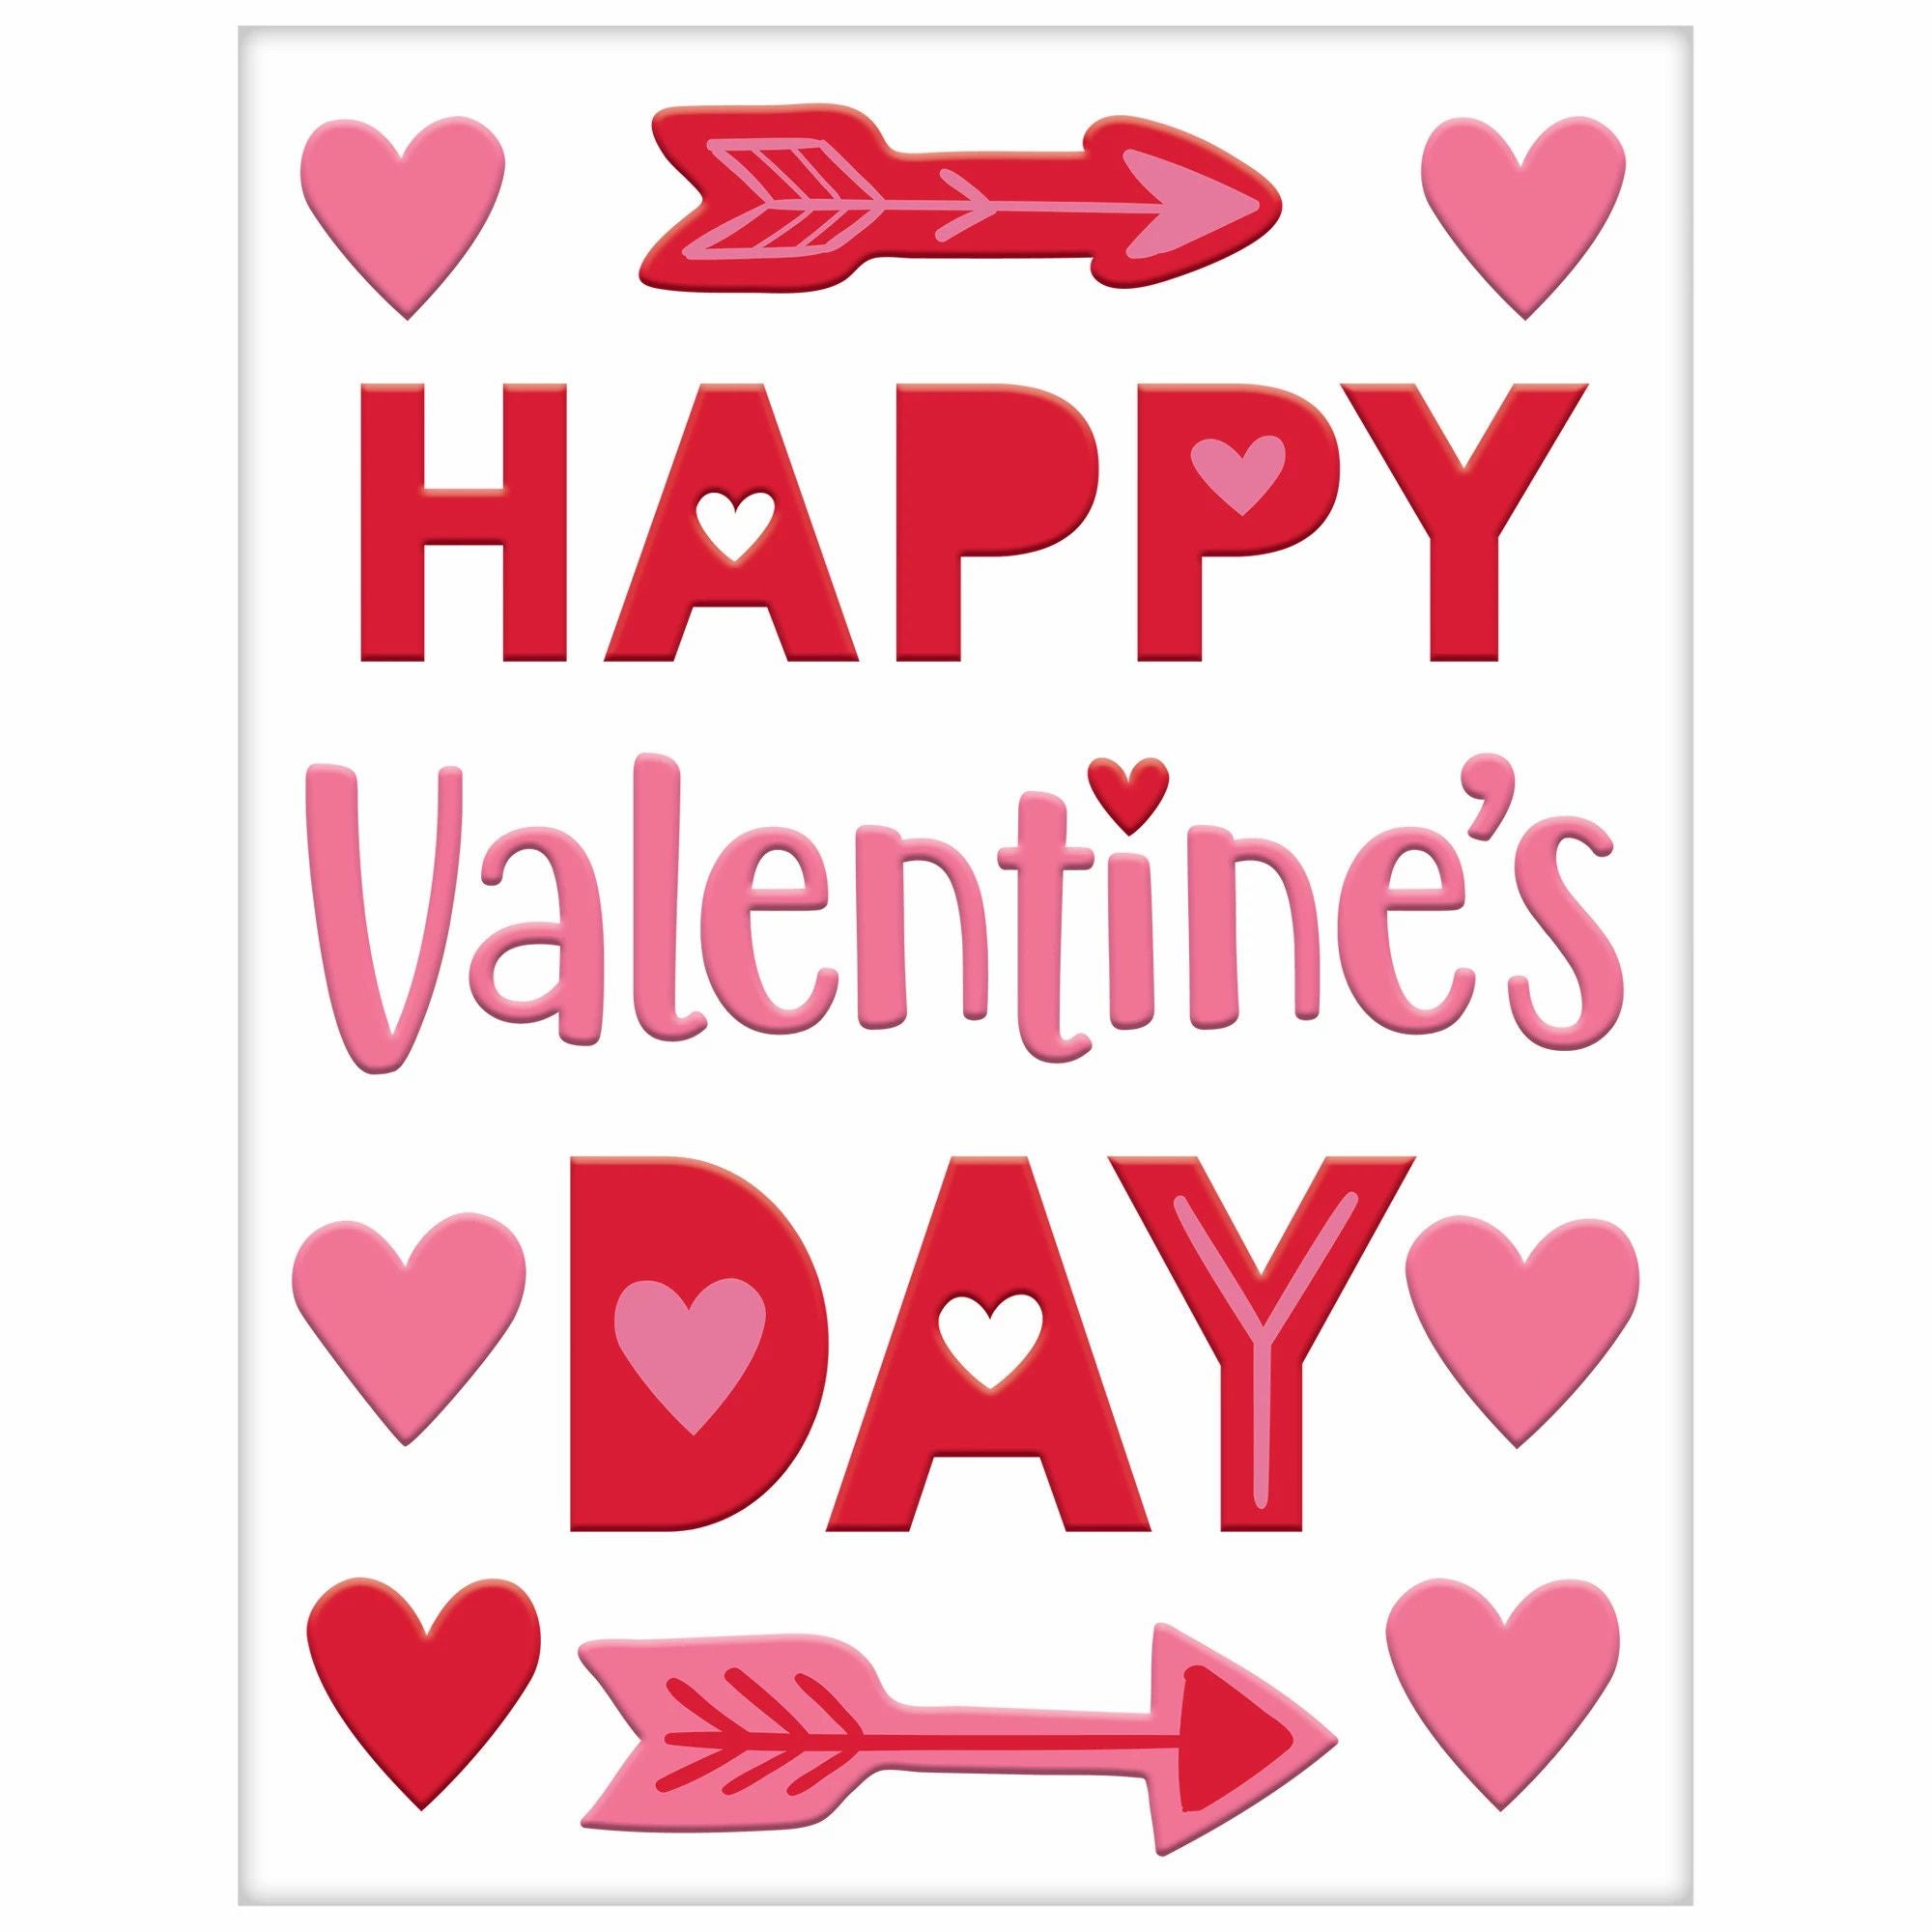 "Happy Valentine's Day" text Gel Clings pink hearts cupid's arrows